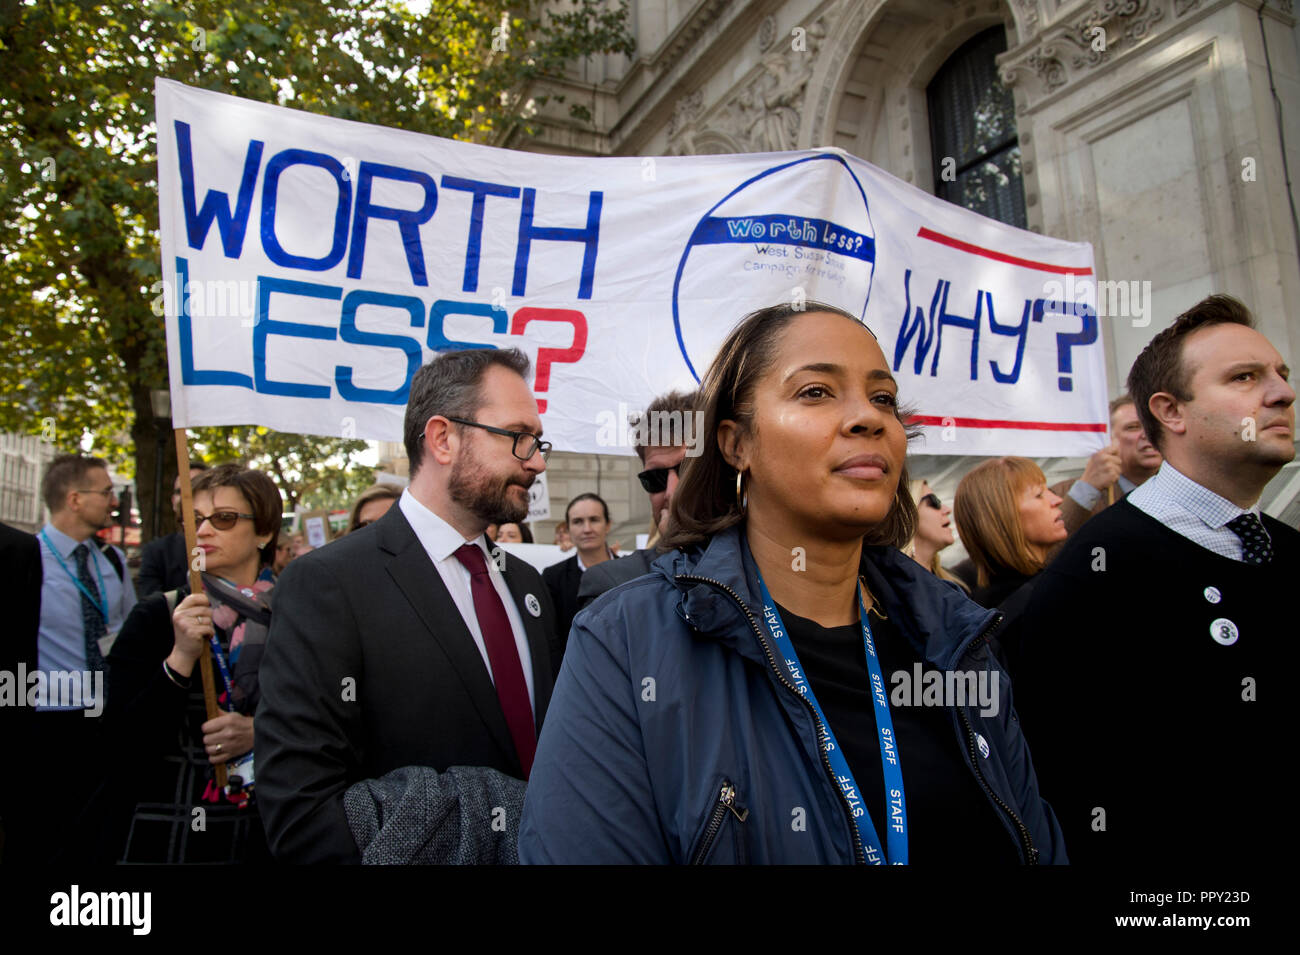 Westminster. London, UK. September 28th 2018. Headteachers from all over the country demonstrated in Parliament Square over cuts to state school funding and walked to Downing Street where they handed in a letter to the Chancellor of the Exchequer, Philip Hammond. Headteachers walk behind a banner saying 'Worth-less . Why?. Credit: Jenny Matthews/Alamy Live News Stock Photo